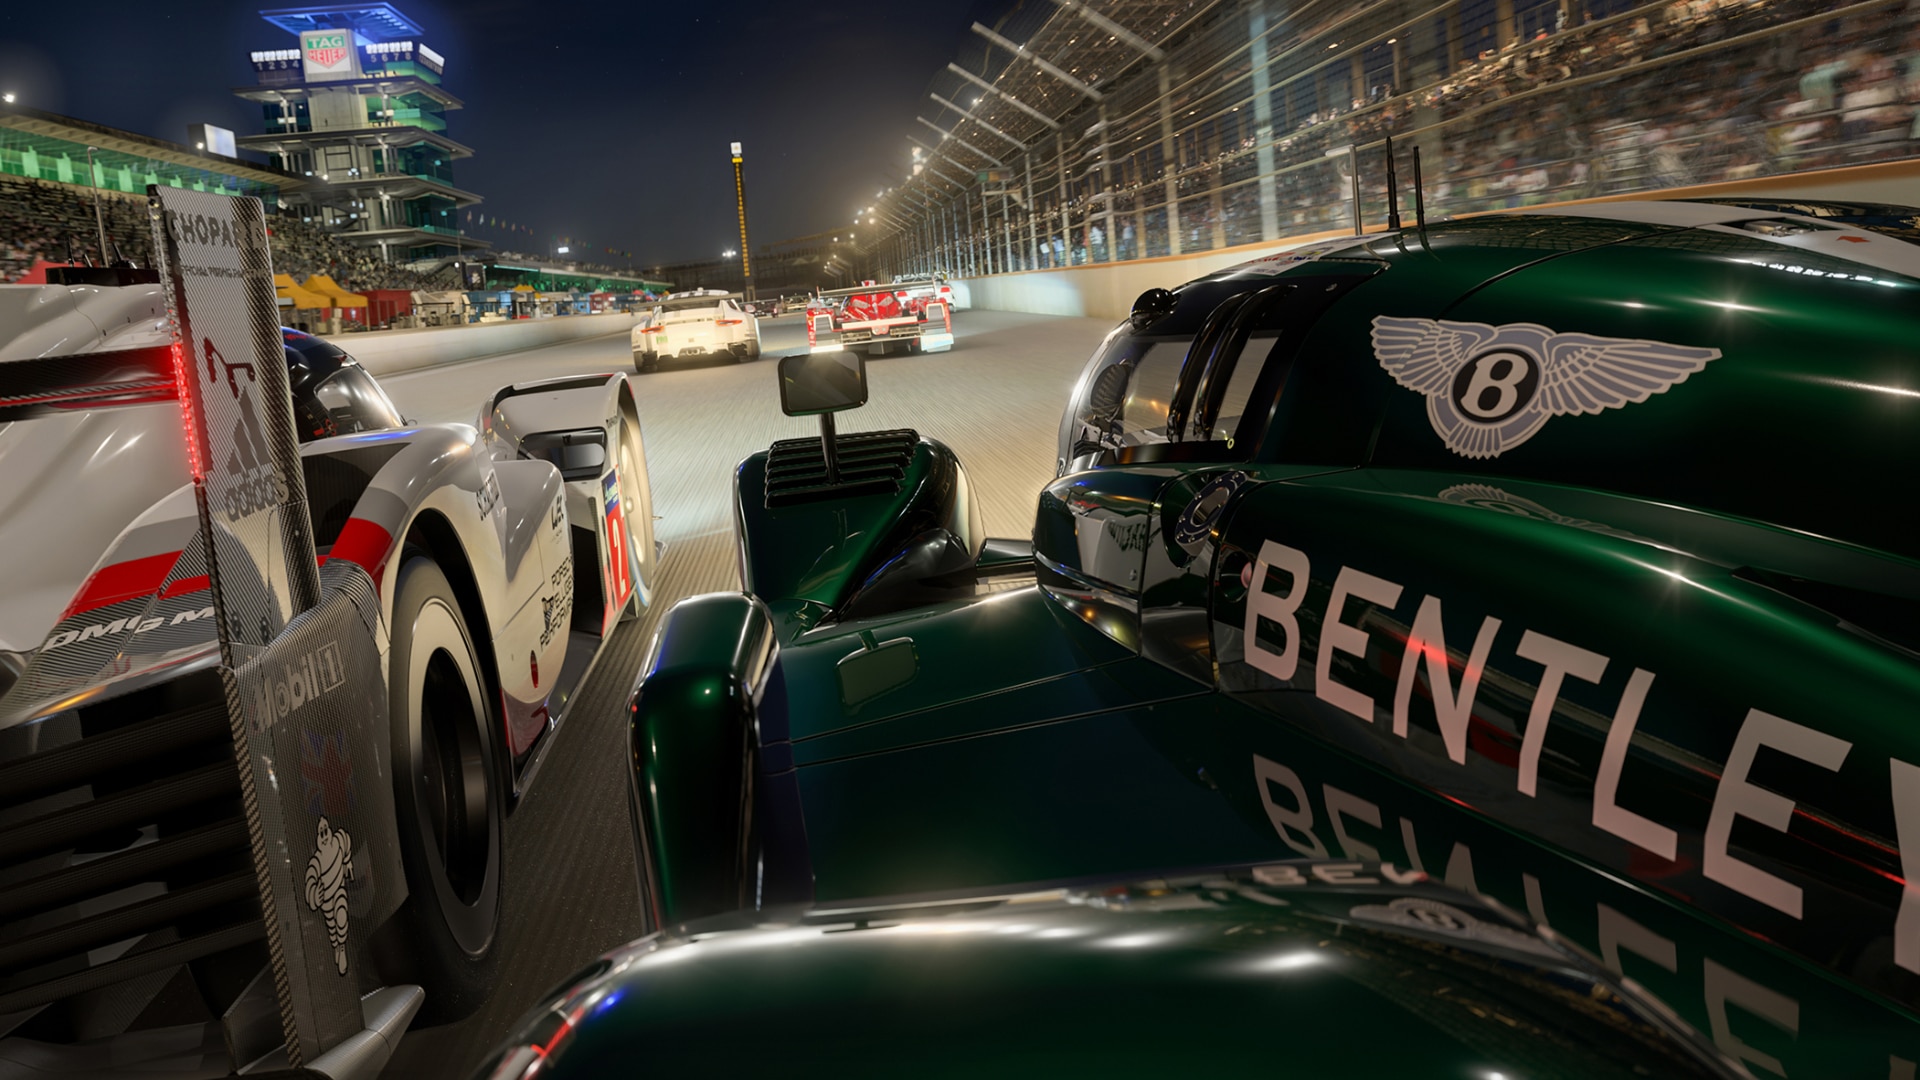 Forza Motorsport is the latest victim of review bombing on Steam